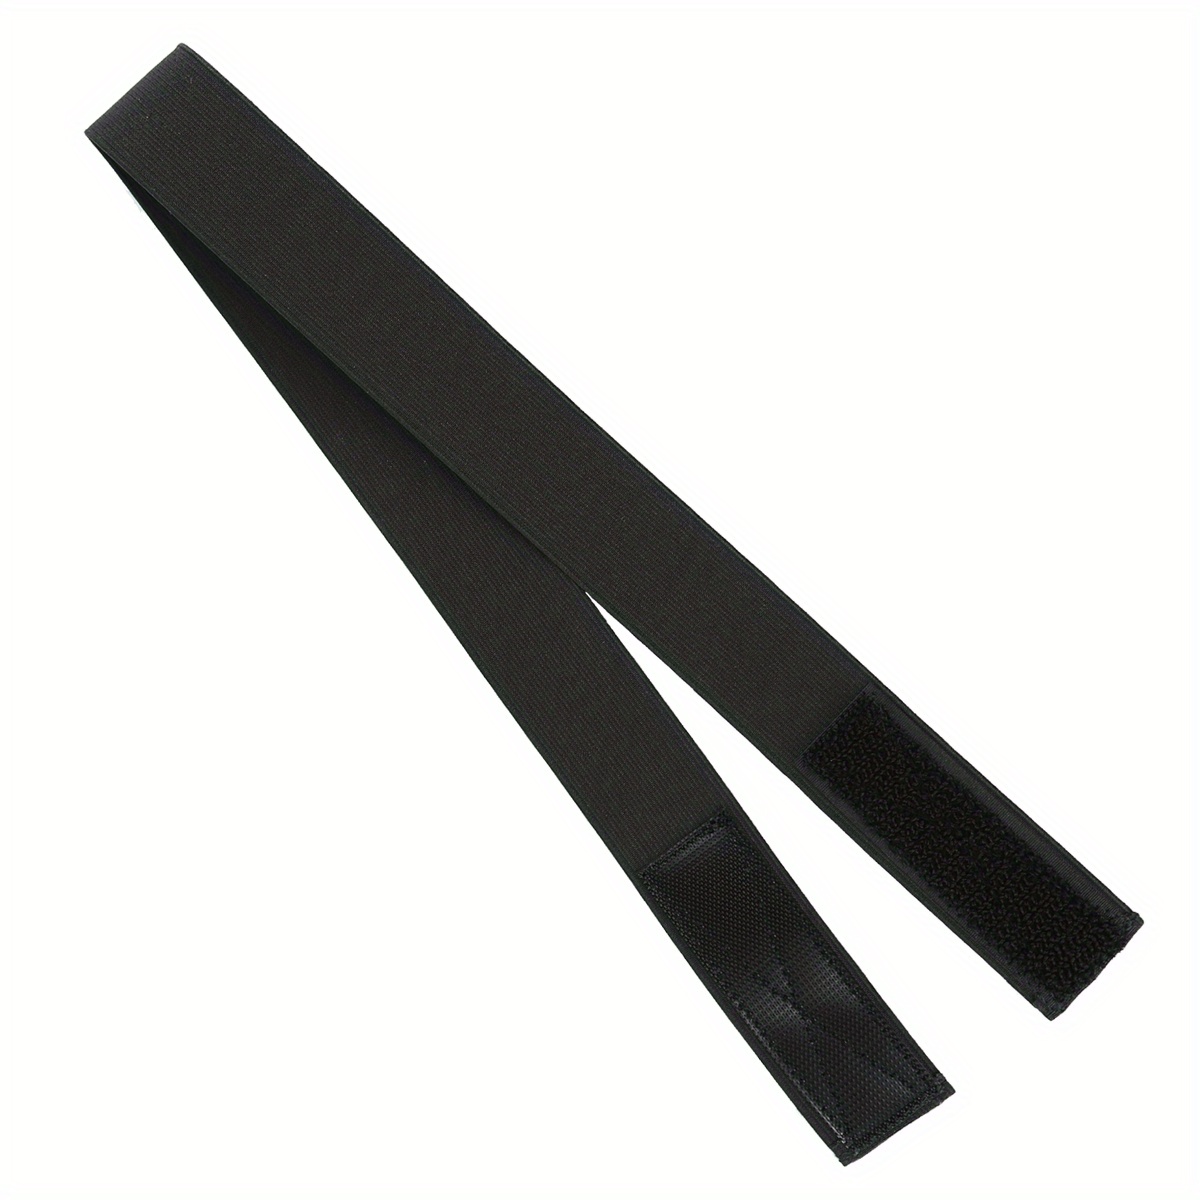 1pc Elastic Bands for Wig, Edge Wrap to Lay Edges, Lace Melting Bands, Wig Bands for Edges, Lace Frontal Melt, 23.6 inch x 1.4 inch, Size: 23.6 x 1.4